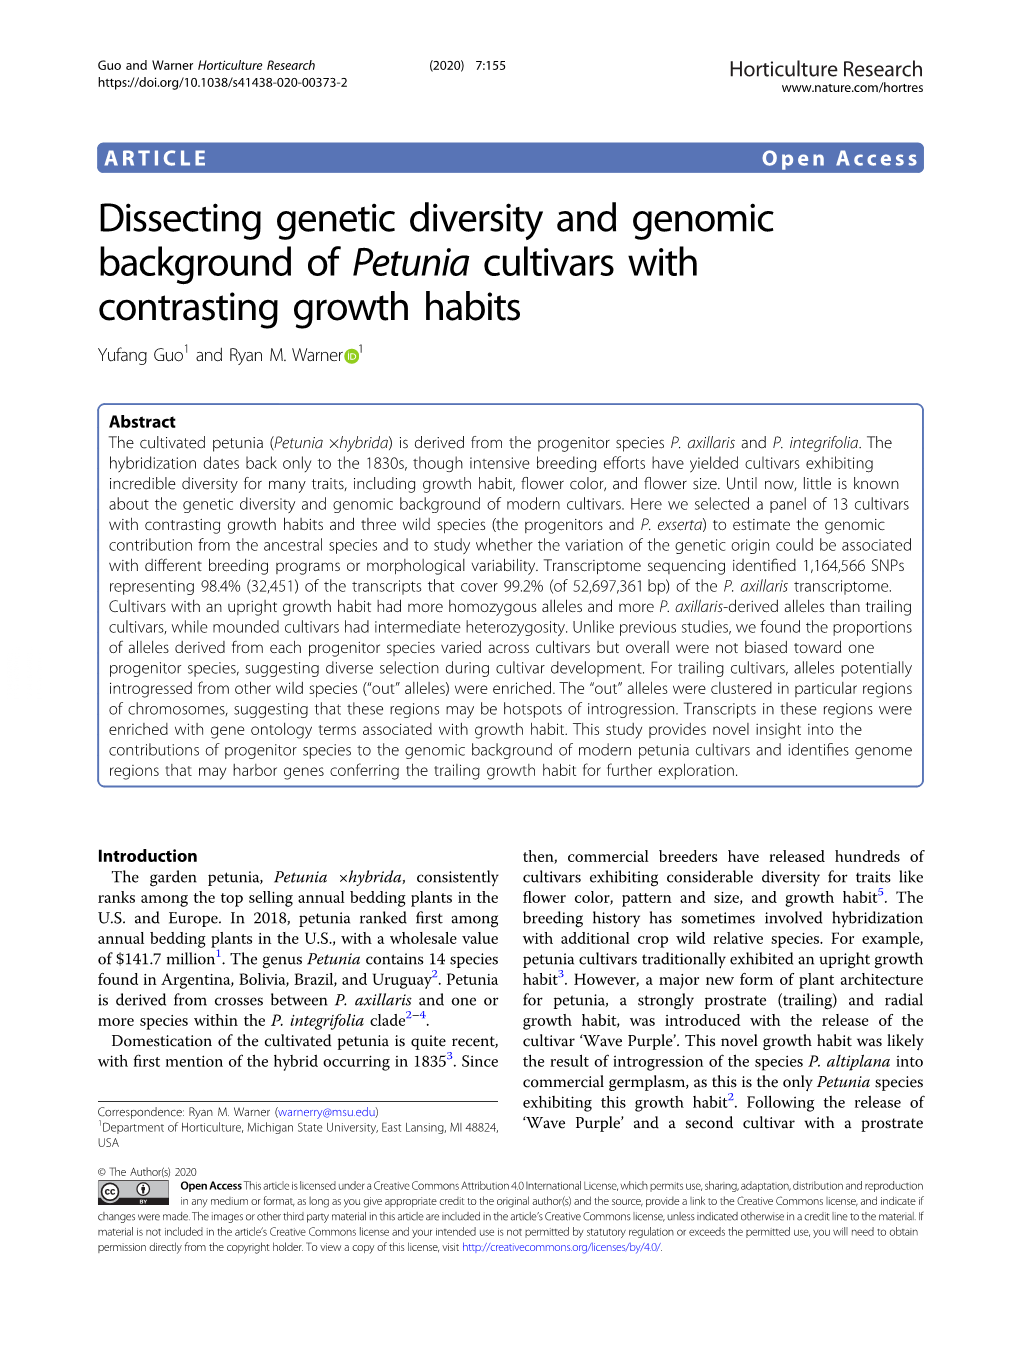 Dissecting Genetic Diversity and Genomic Background of Petunia Cultivars with Contrasting Growth Habits Yufang Guo1 and Ryan M